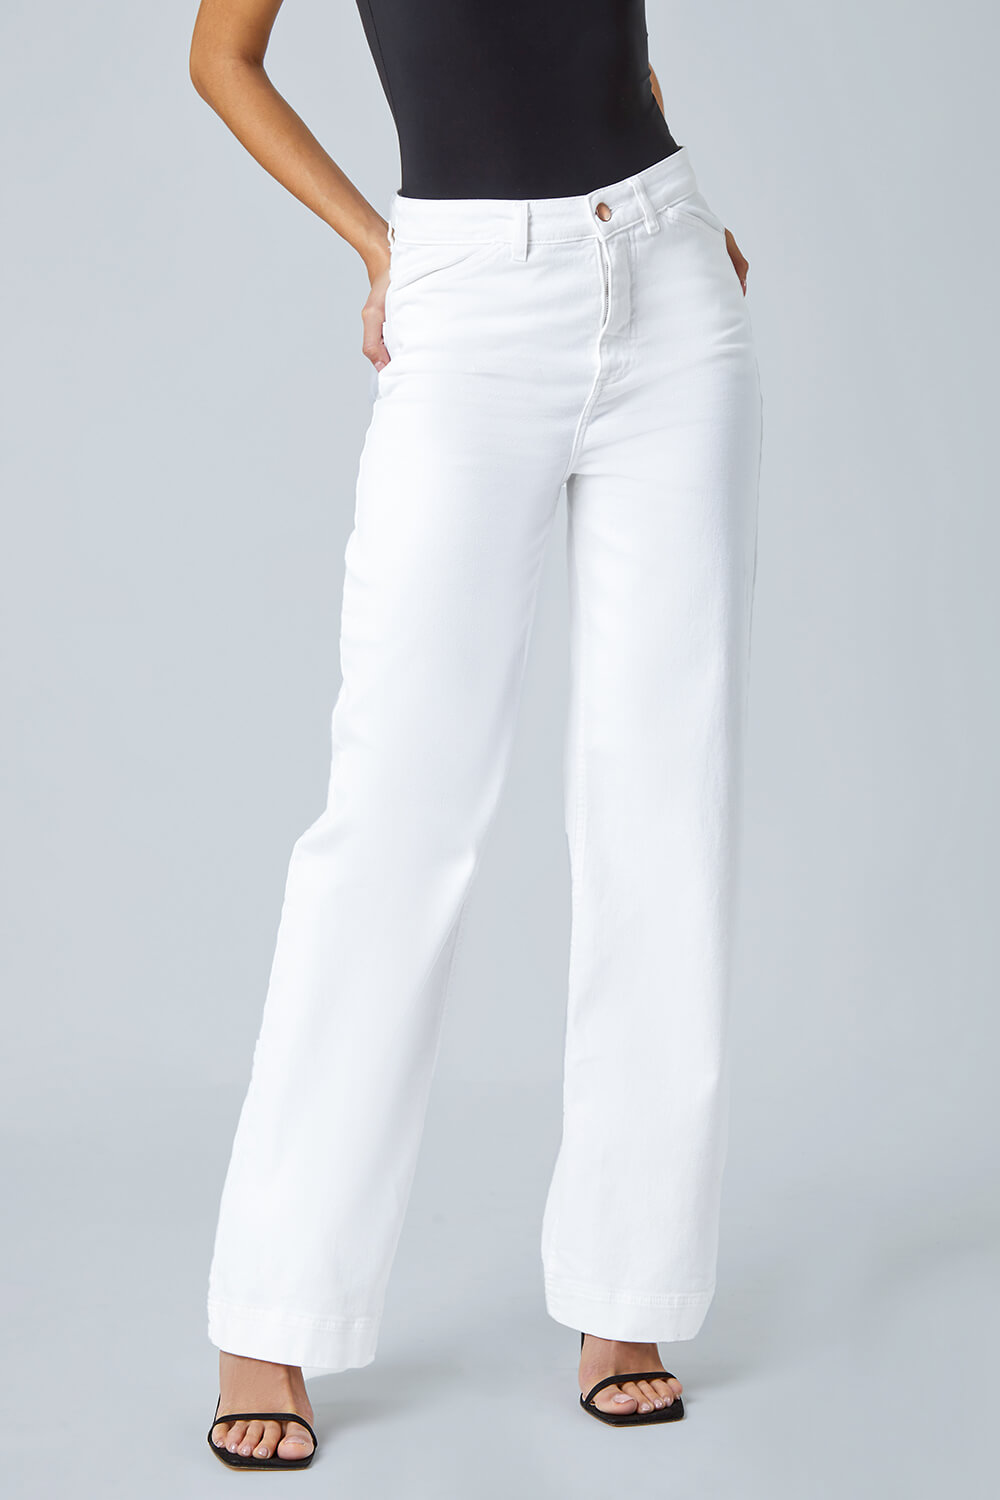 White Cotton Blend Wide Leg Stretch Jeans, Image 4 of 6